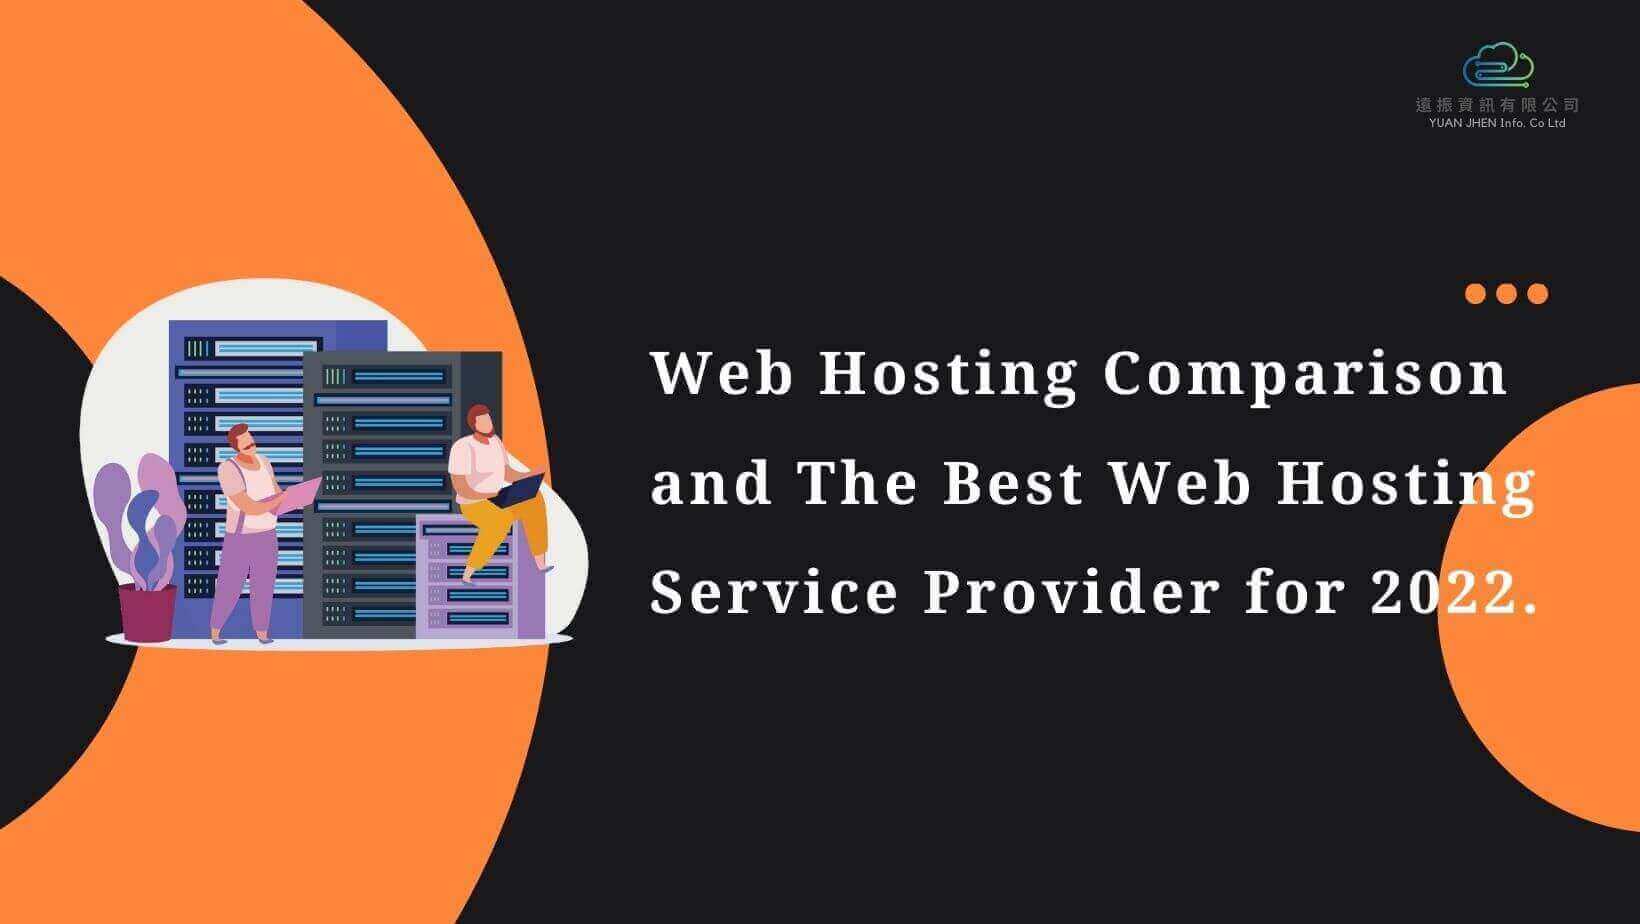 Web Hosting Comparison and The Best Web Hosting Service Provider for 2022